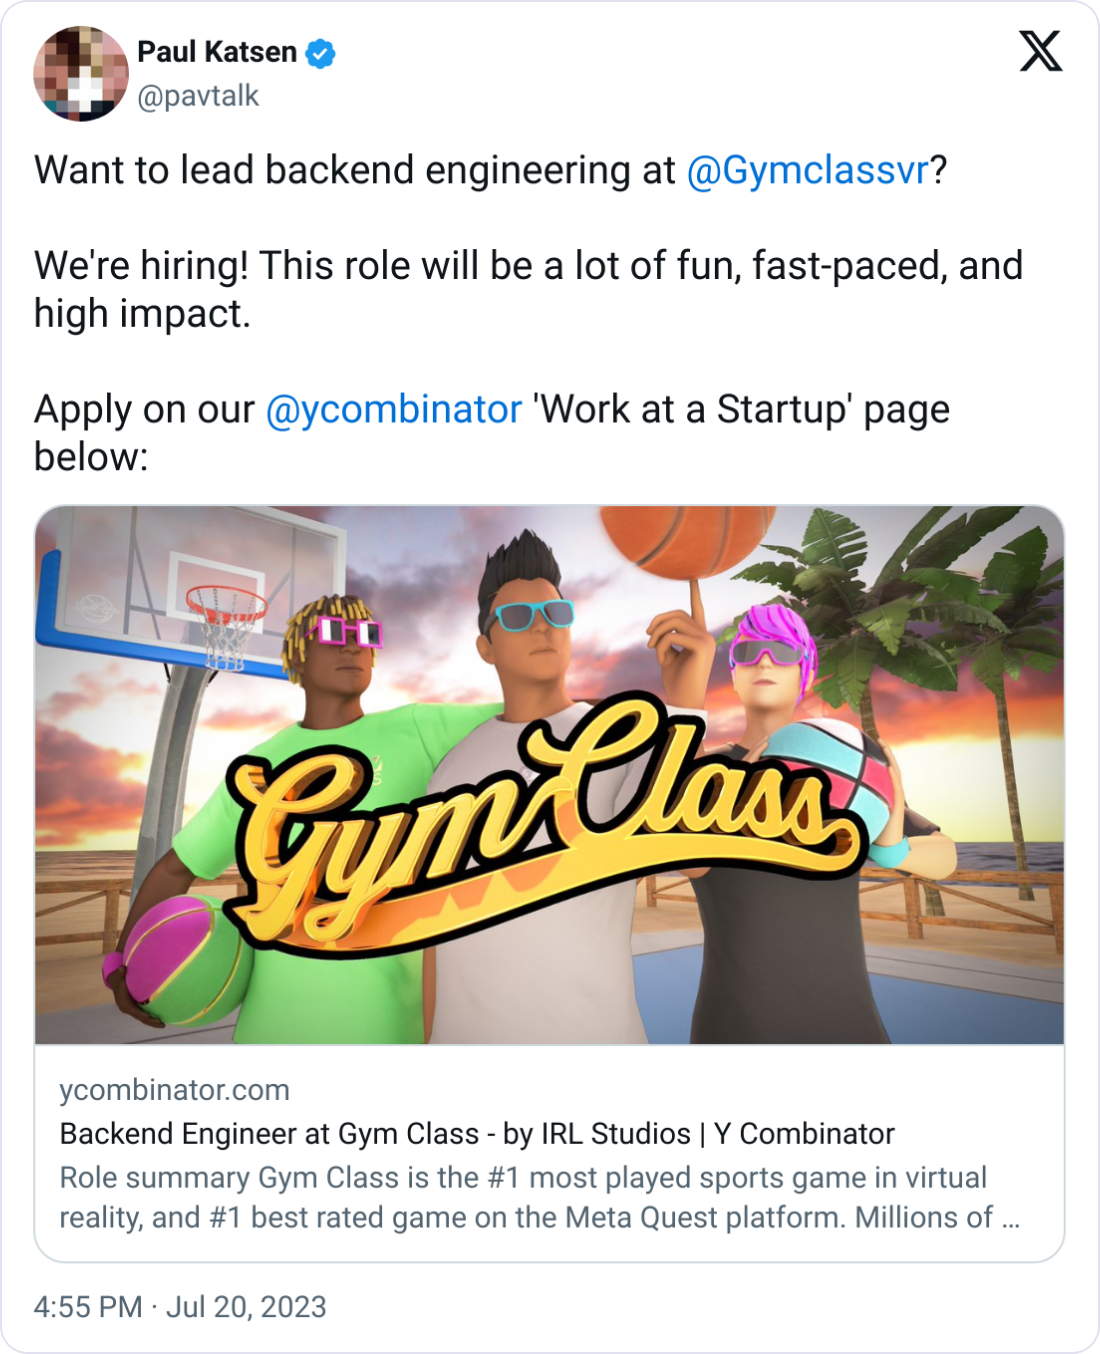  Paul Katsen @pavtalk Want to lead backend engineering at  @Gymclassvr ?  We're hiring! This role will be a lot of fun, fast-paced, and high impact.  Apply on our  @ycombinator  'Work at a Startup' page below: